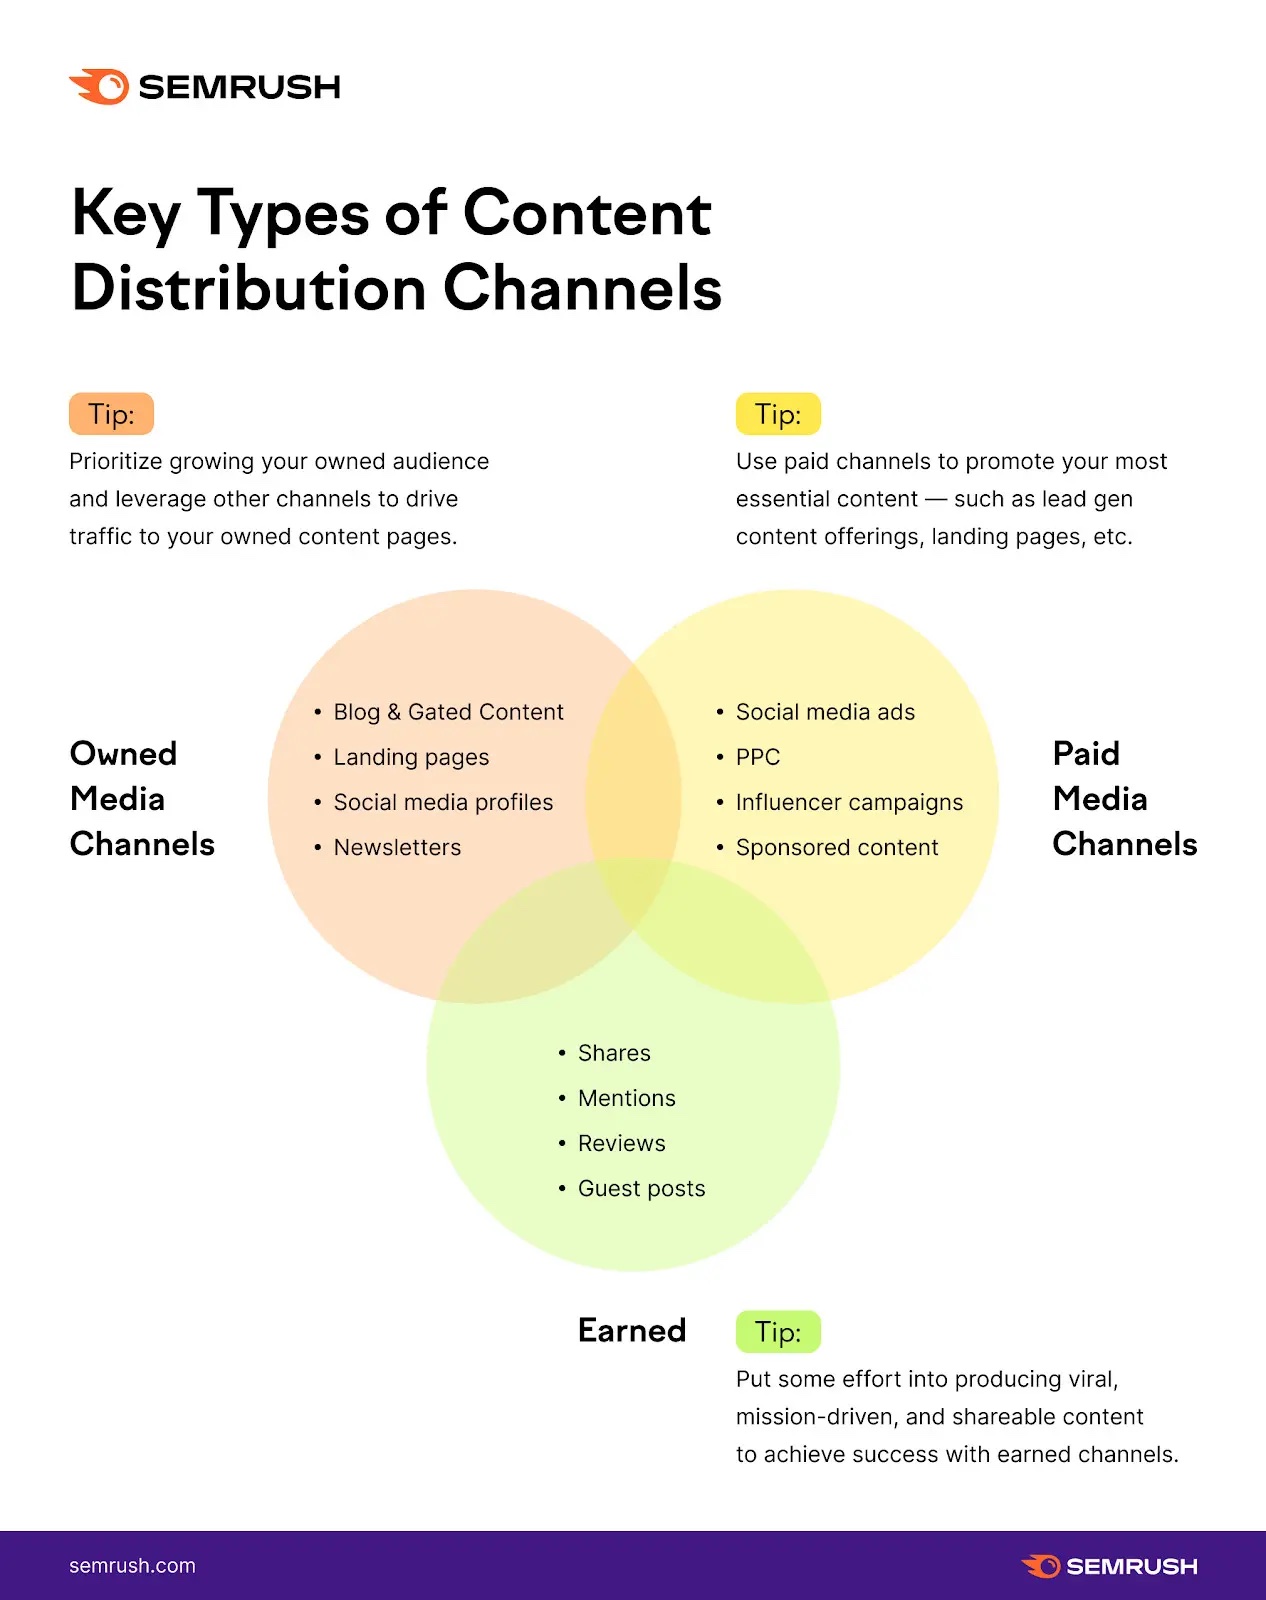 Key types of content distribution channels